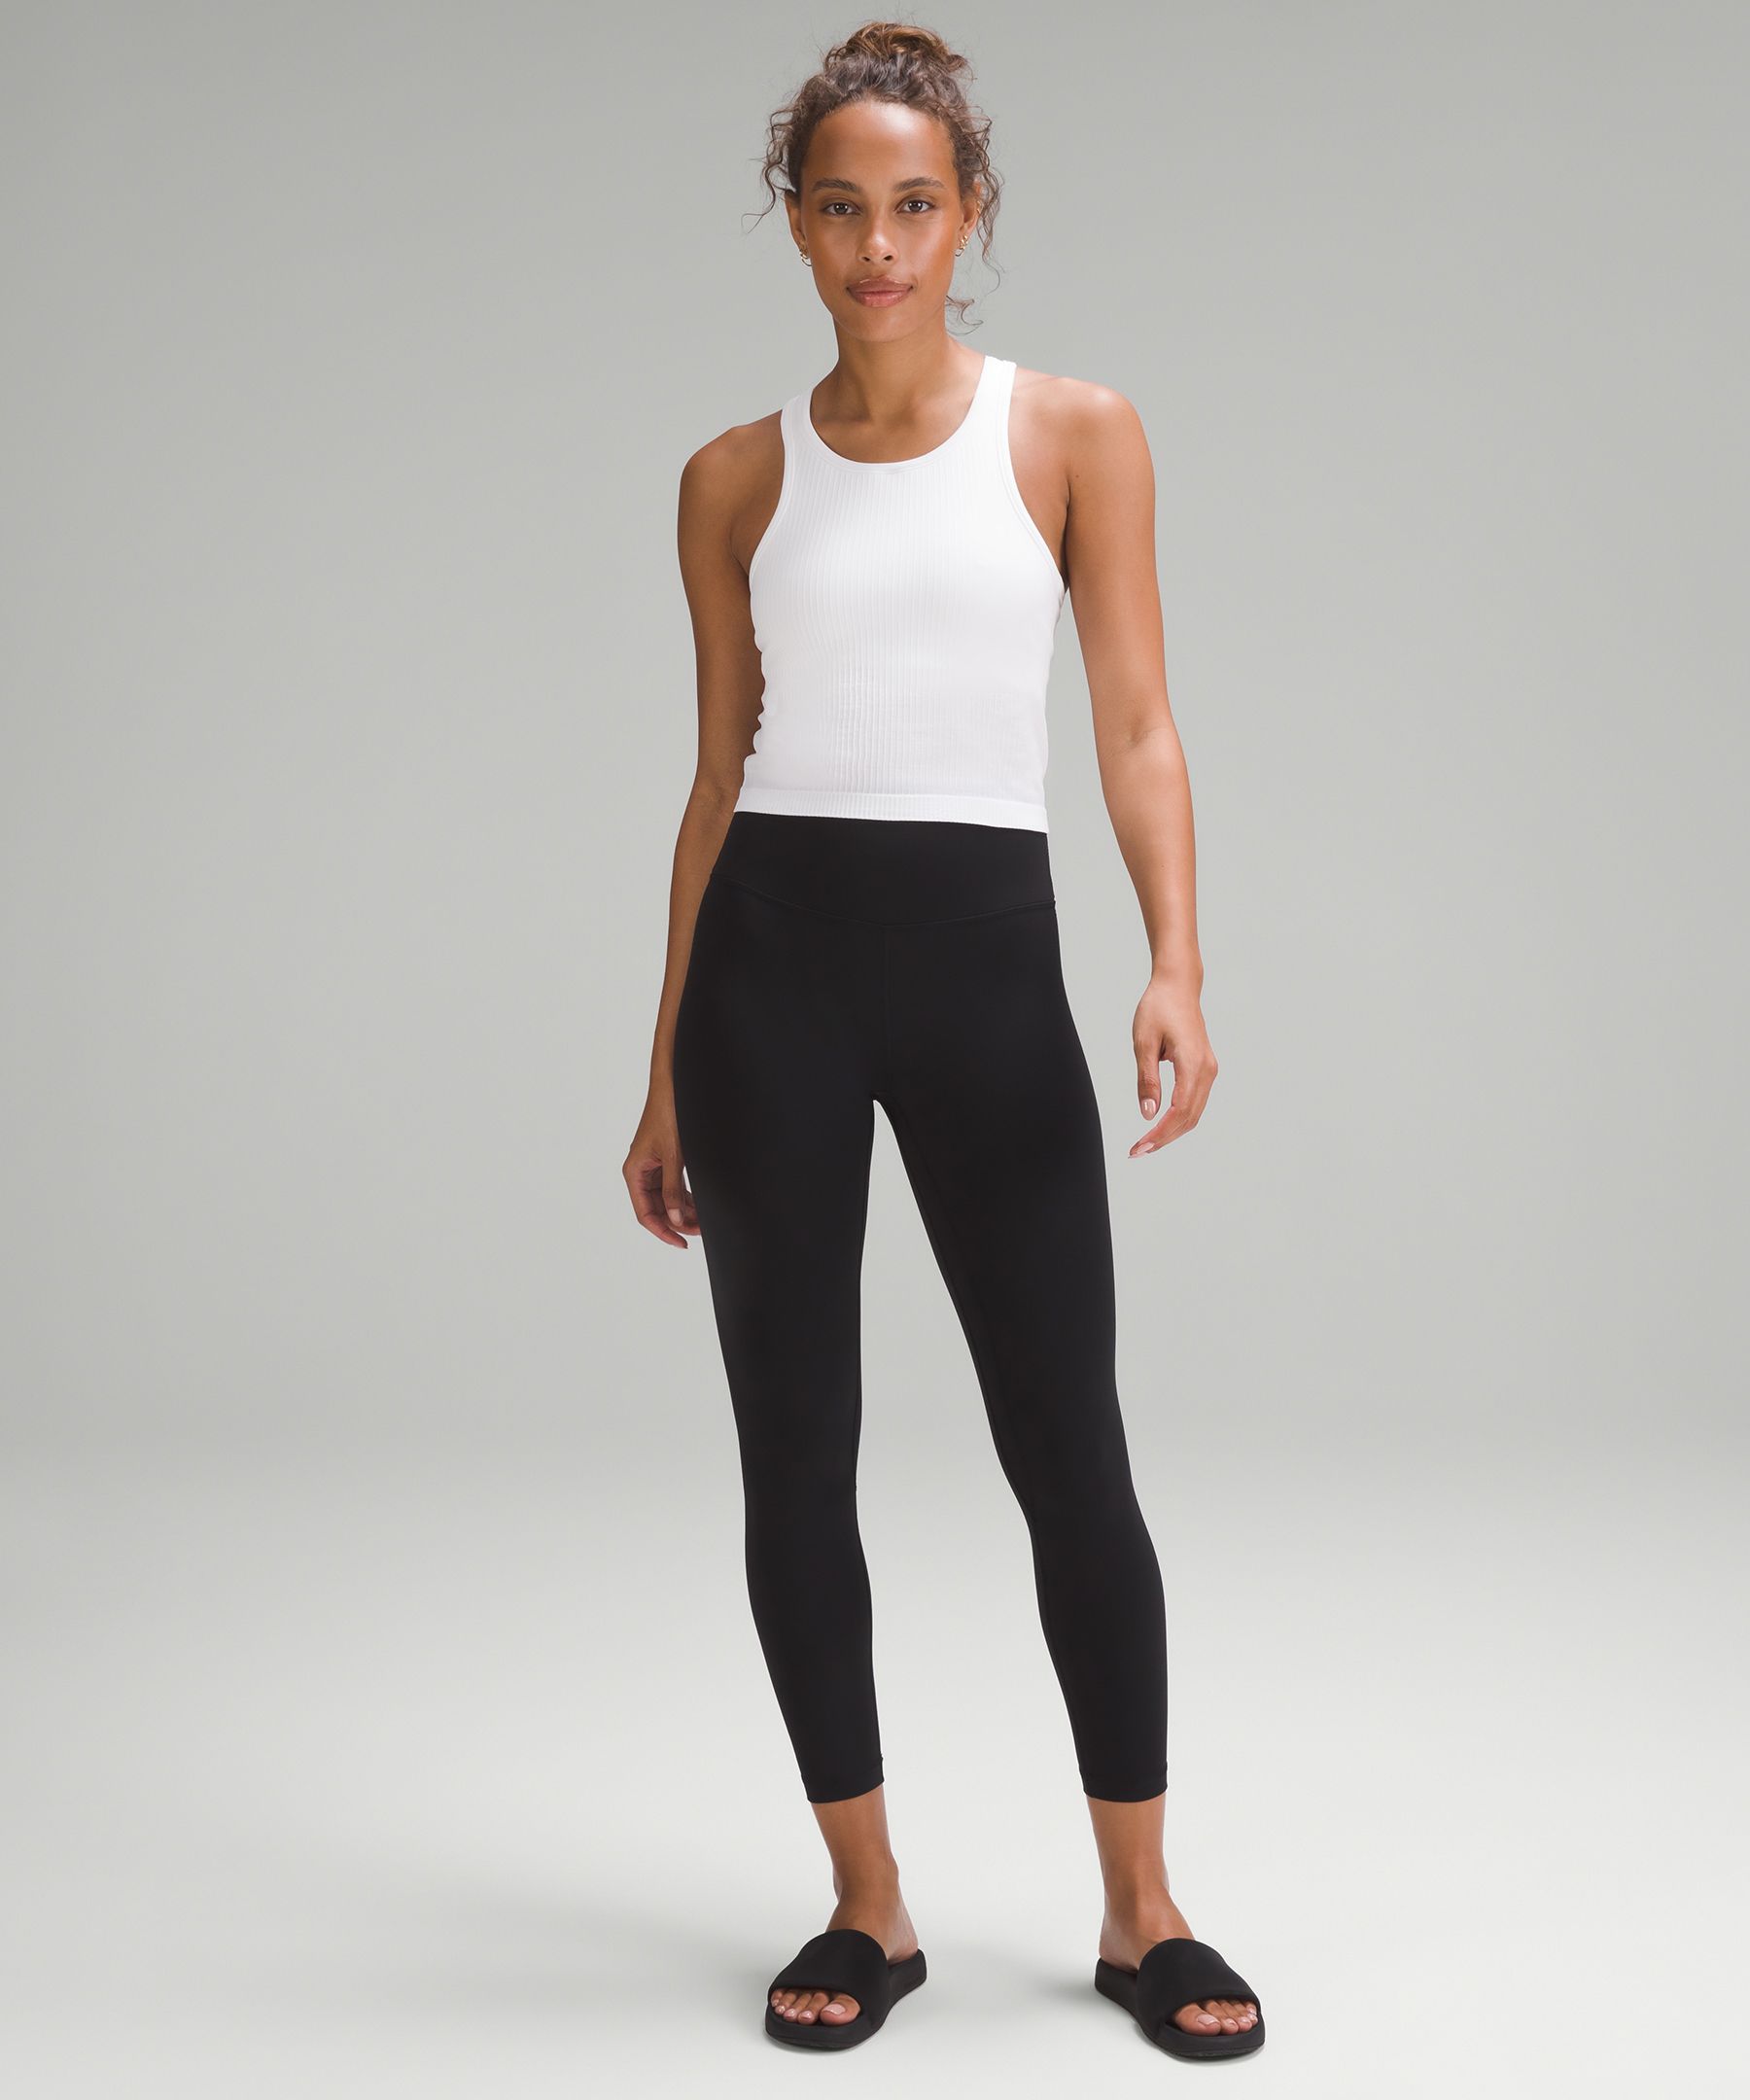 lululemon Align™ High Rise Crop 20 *Asia Fit, Pink Clay